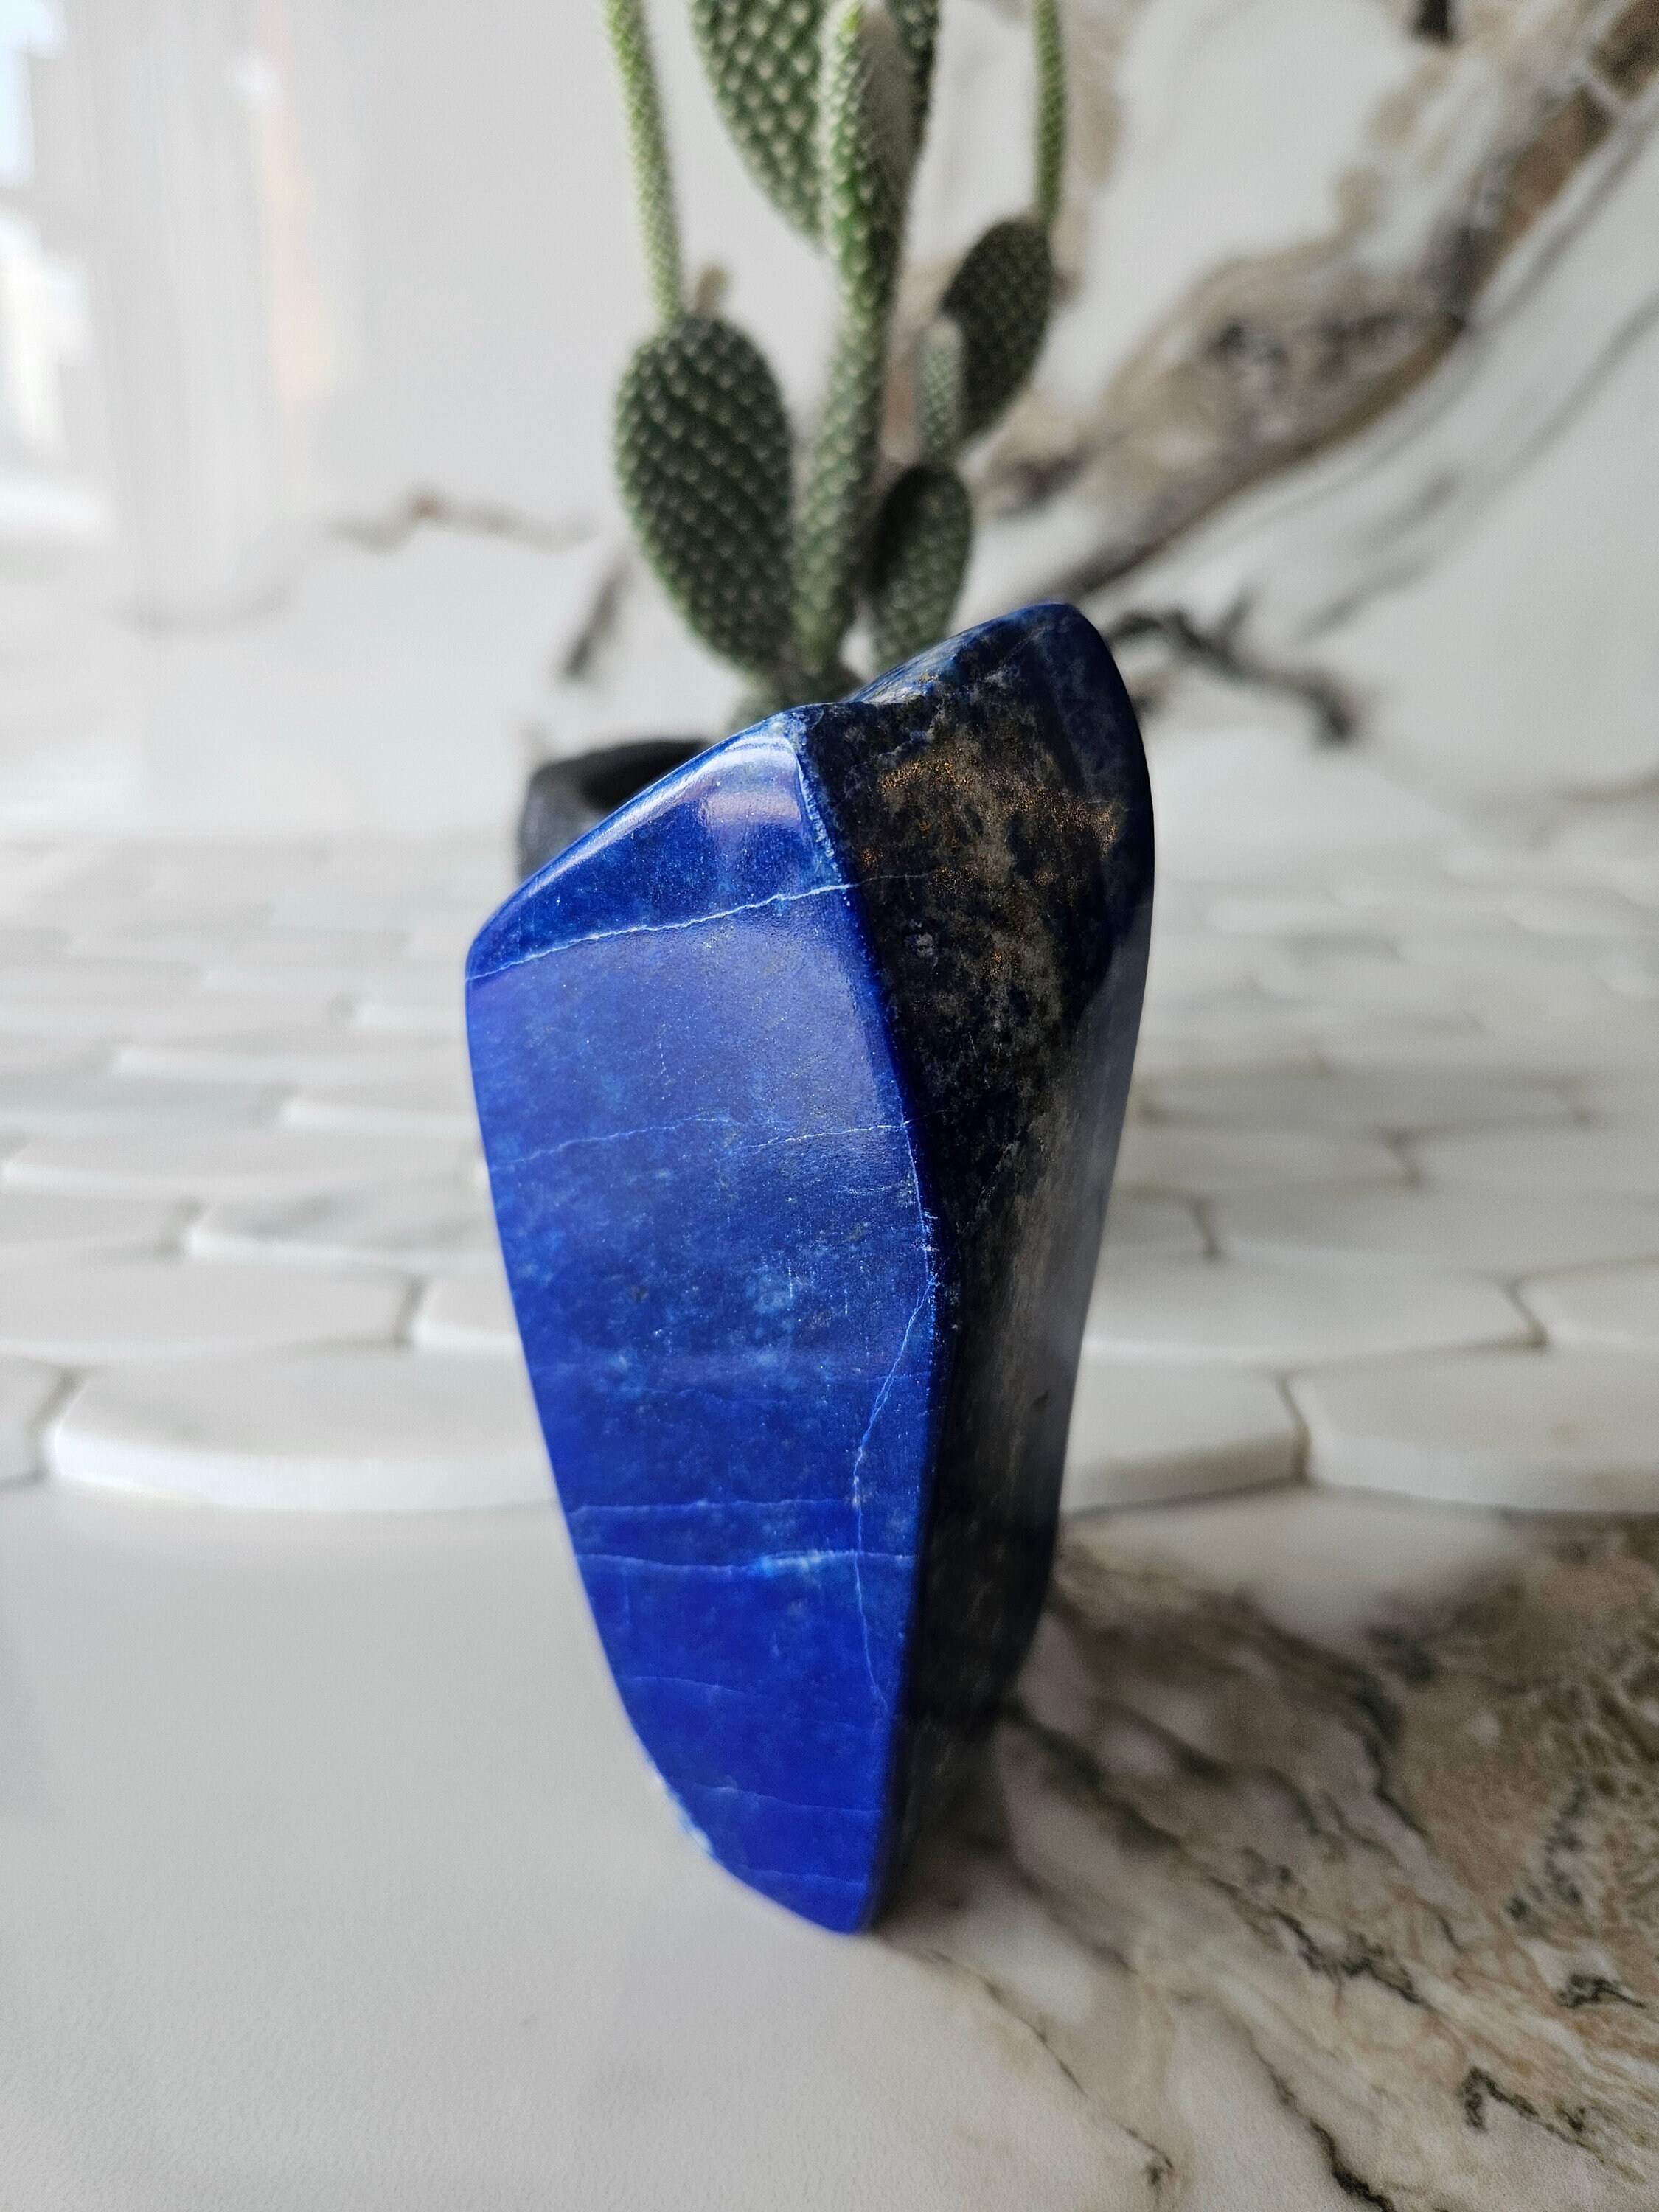 A++ Lapis Lazuli Free Form, Raw Natural Blue Stone, courage, Cabochon, crystal heal, mosaic stone, Stone Slice, Confidence, soothe migraines